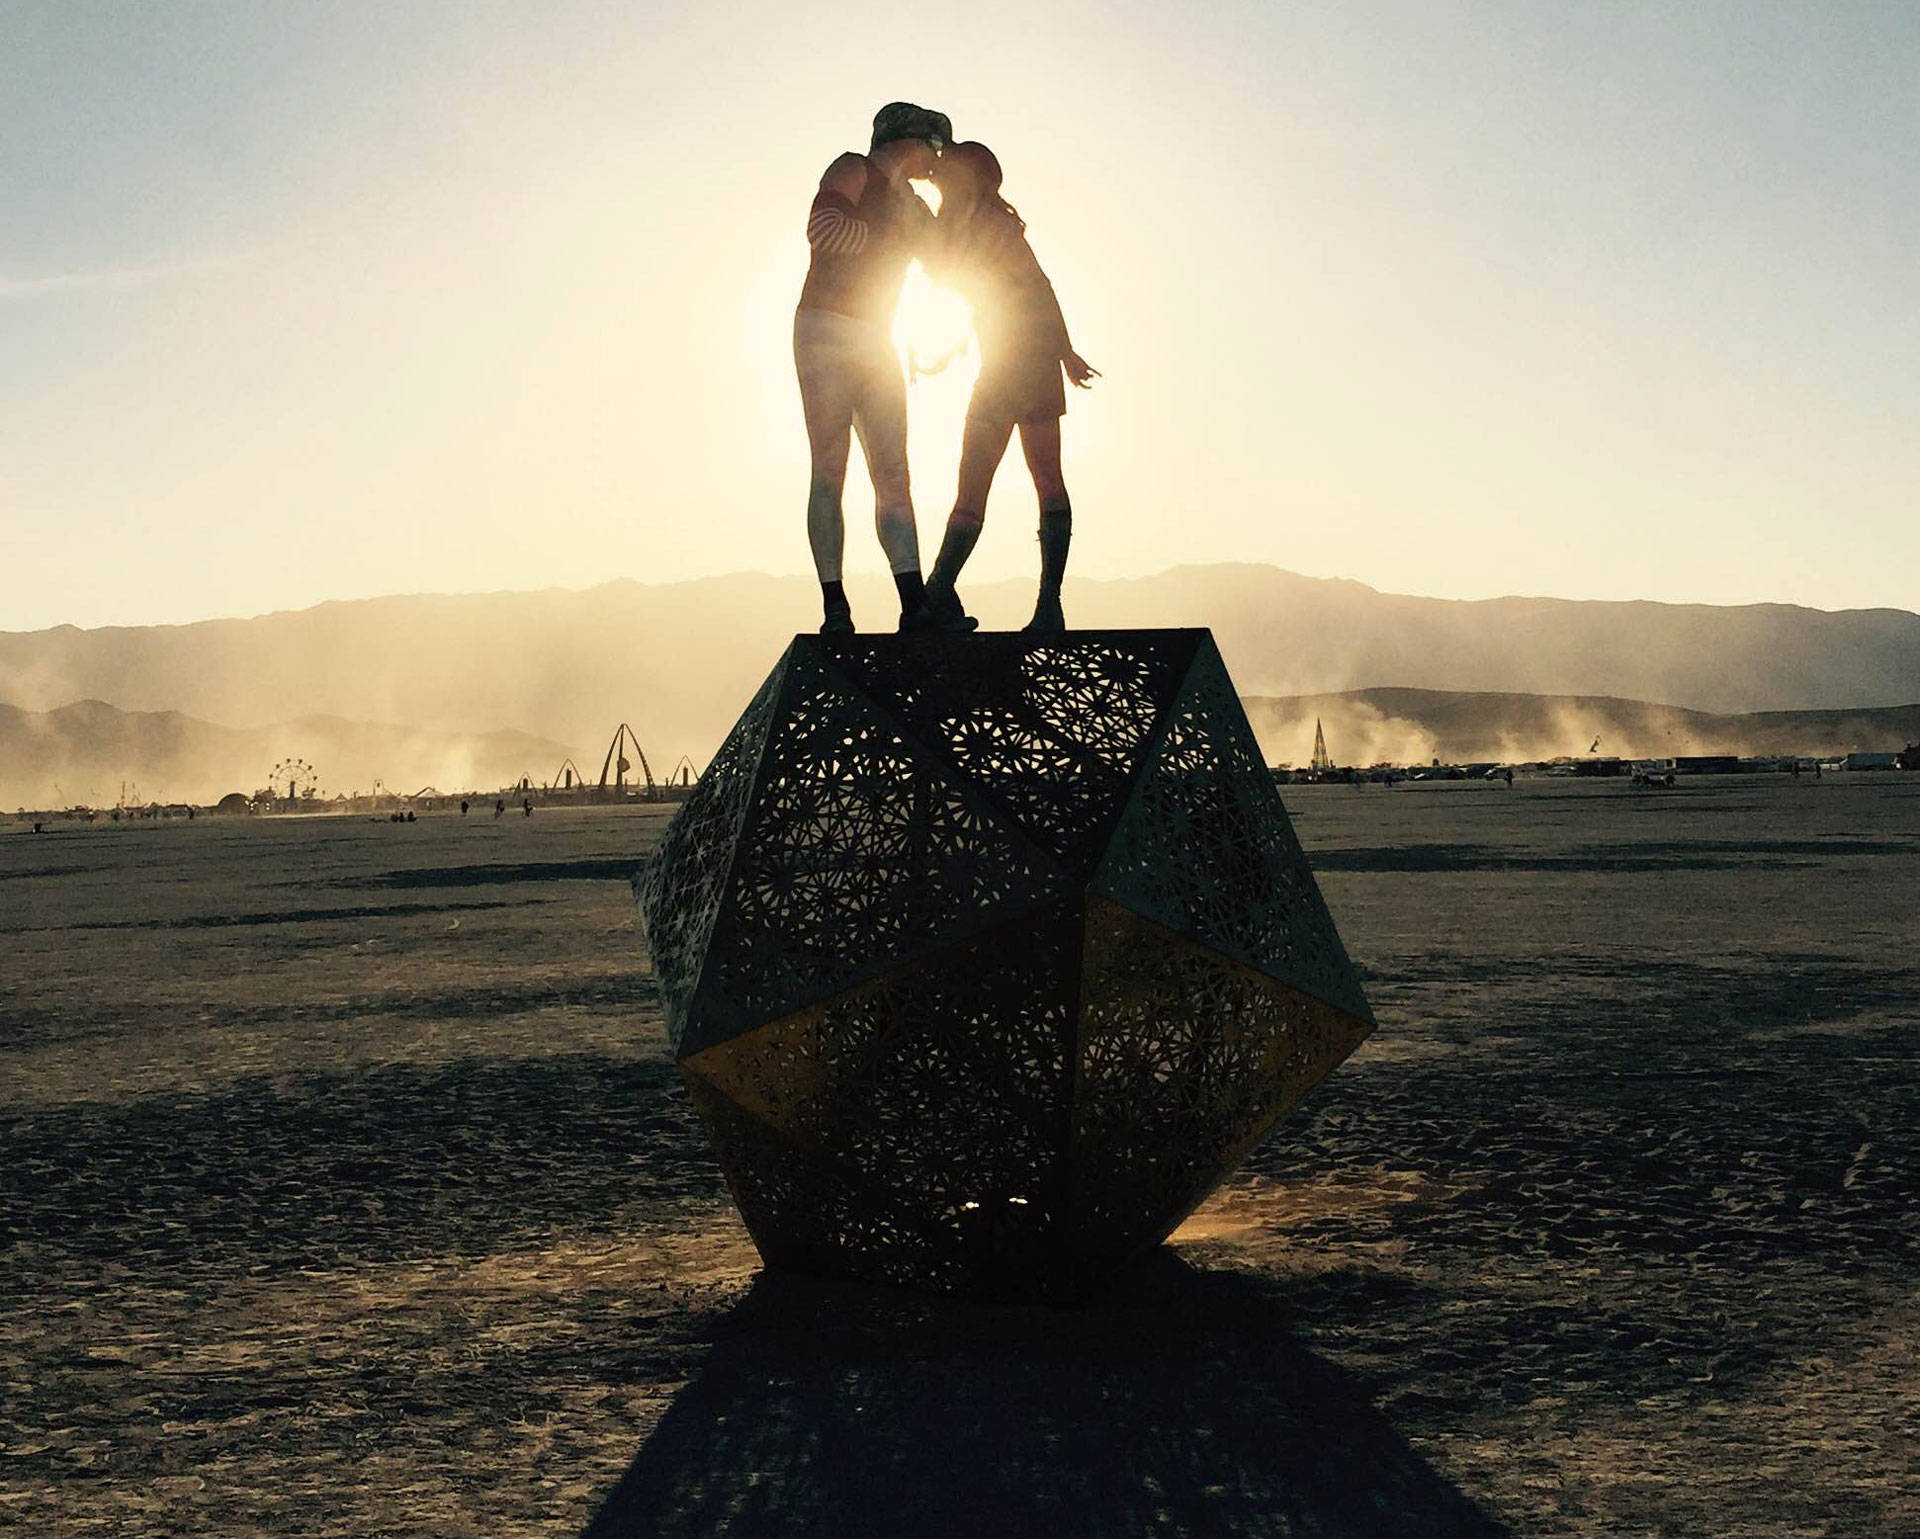 April Dembosky and her husband at Burning Man, 2015.  Courtesy of April Dembosky